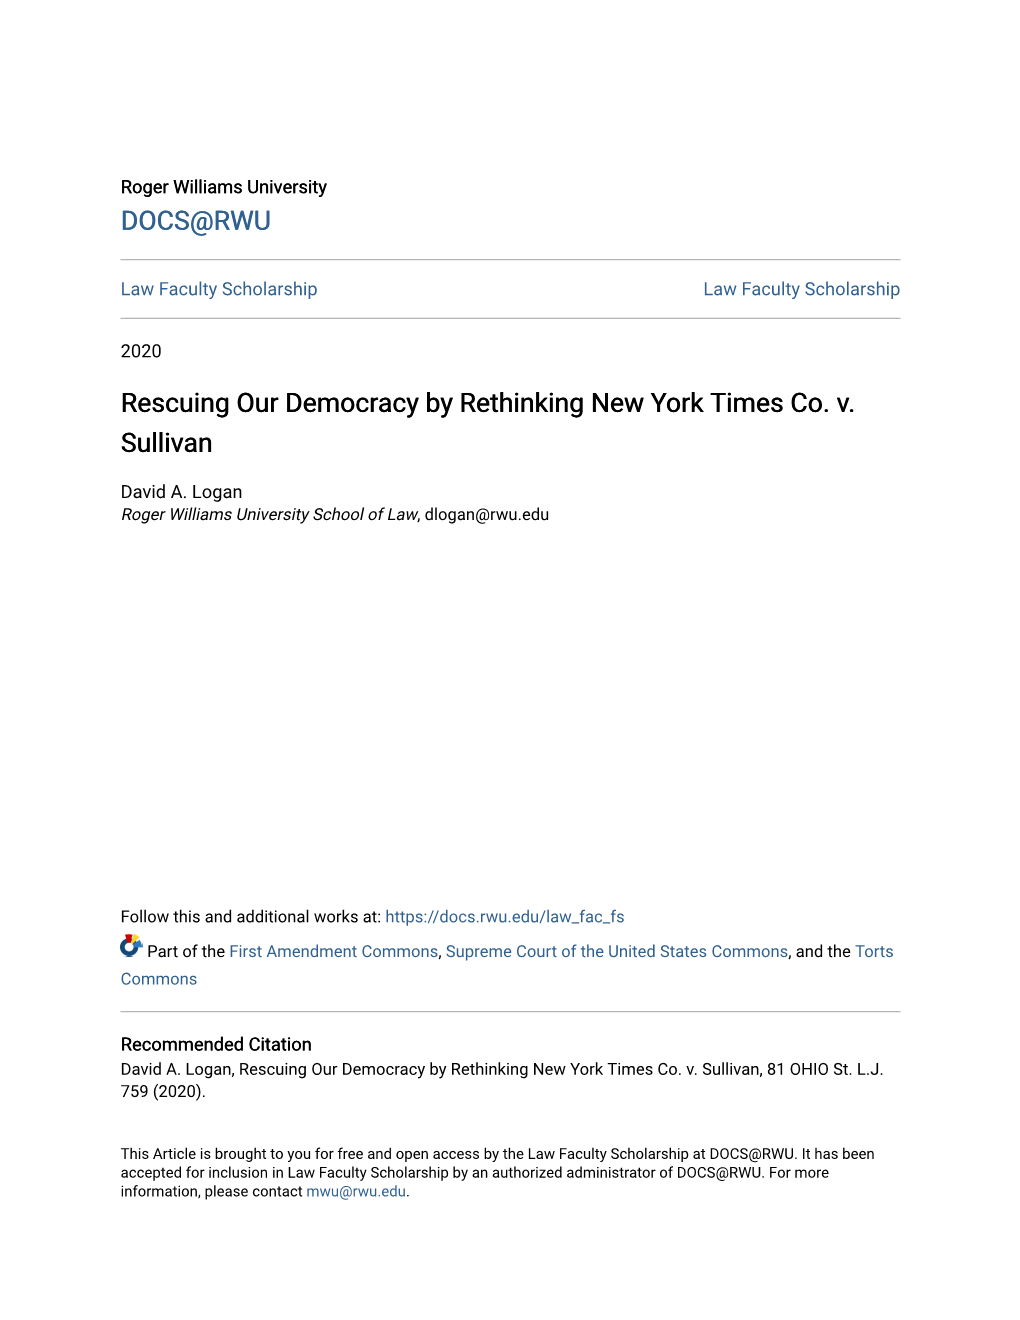 Rescuing Our Democracy by Rethinking New York Times Co. V